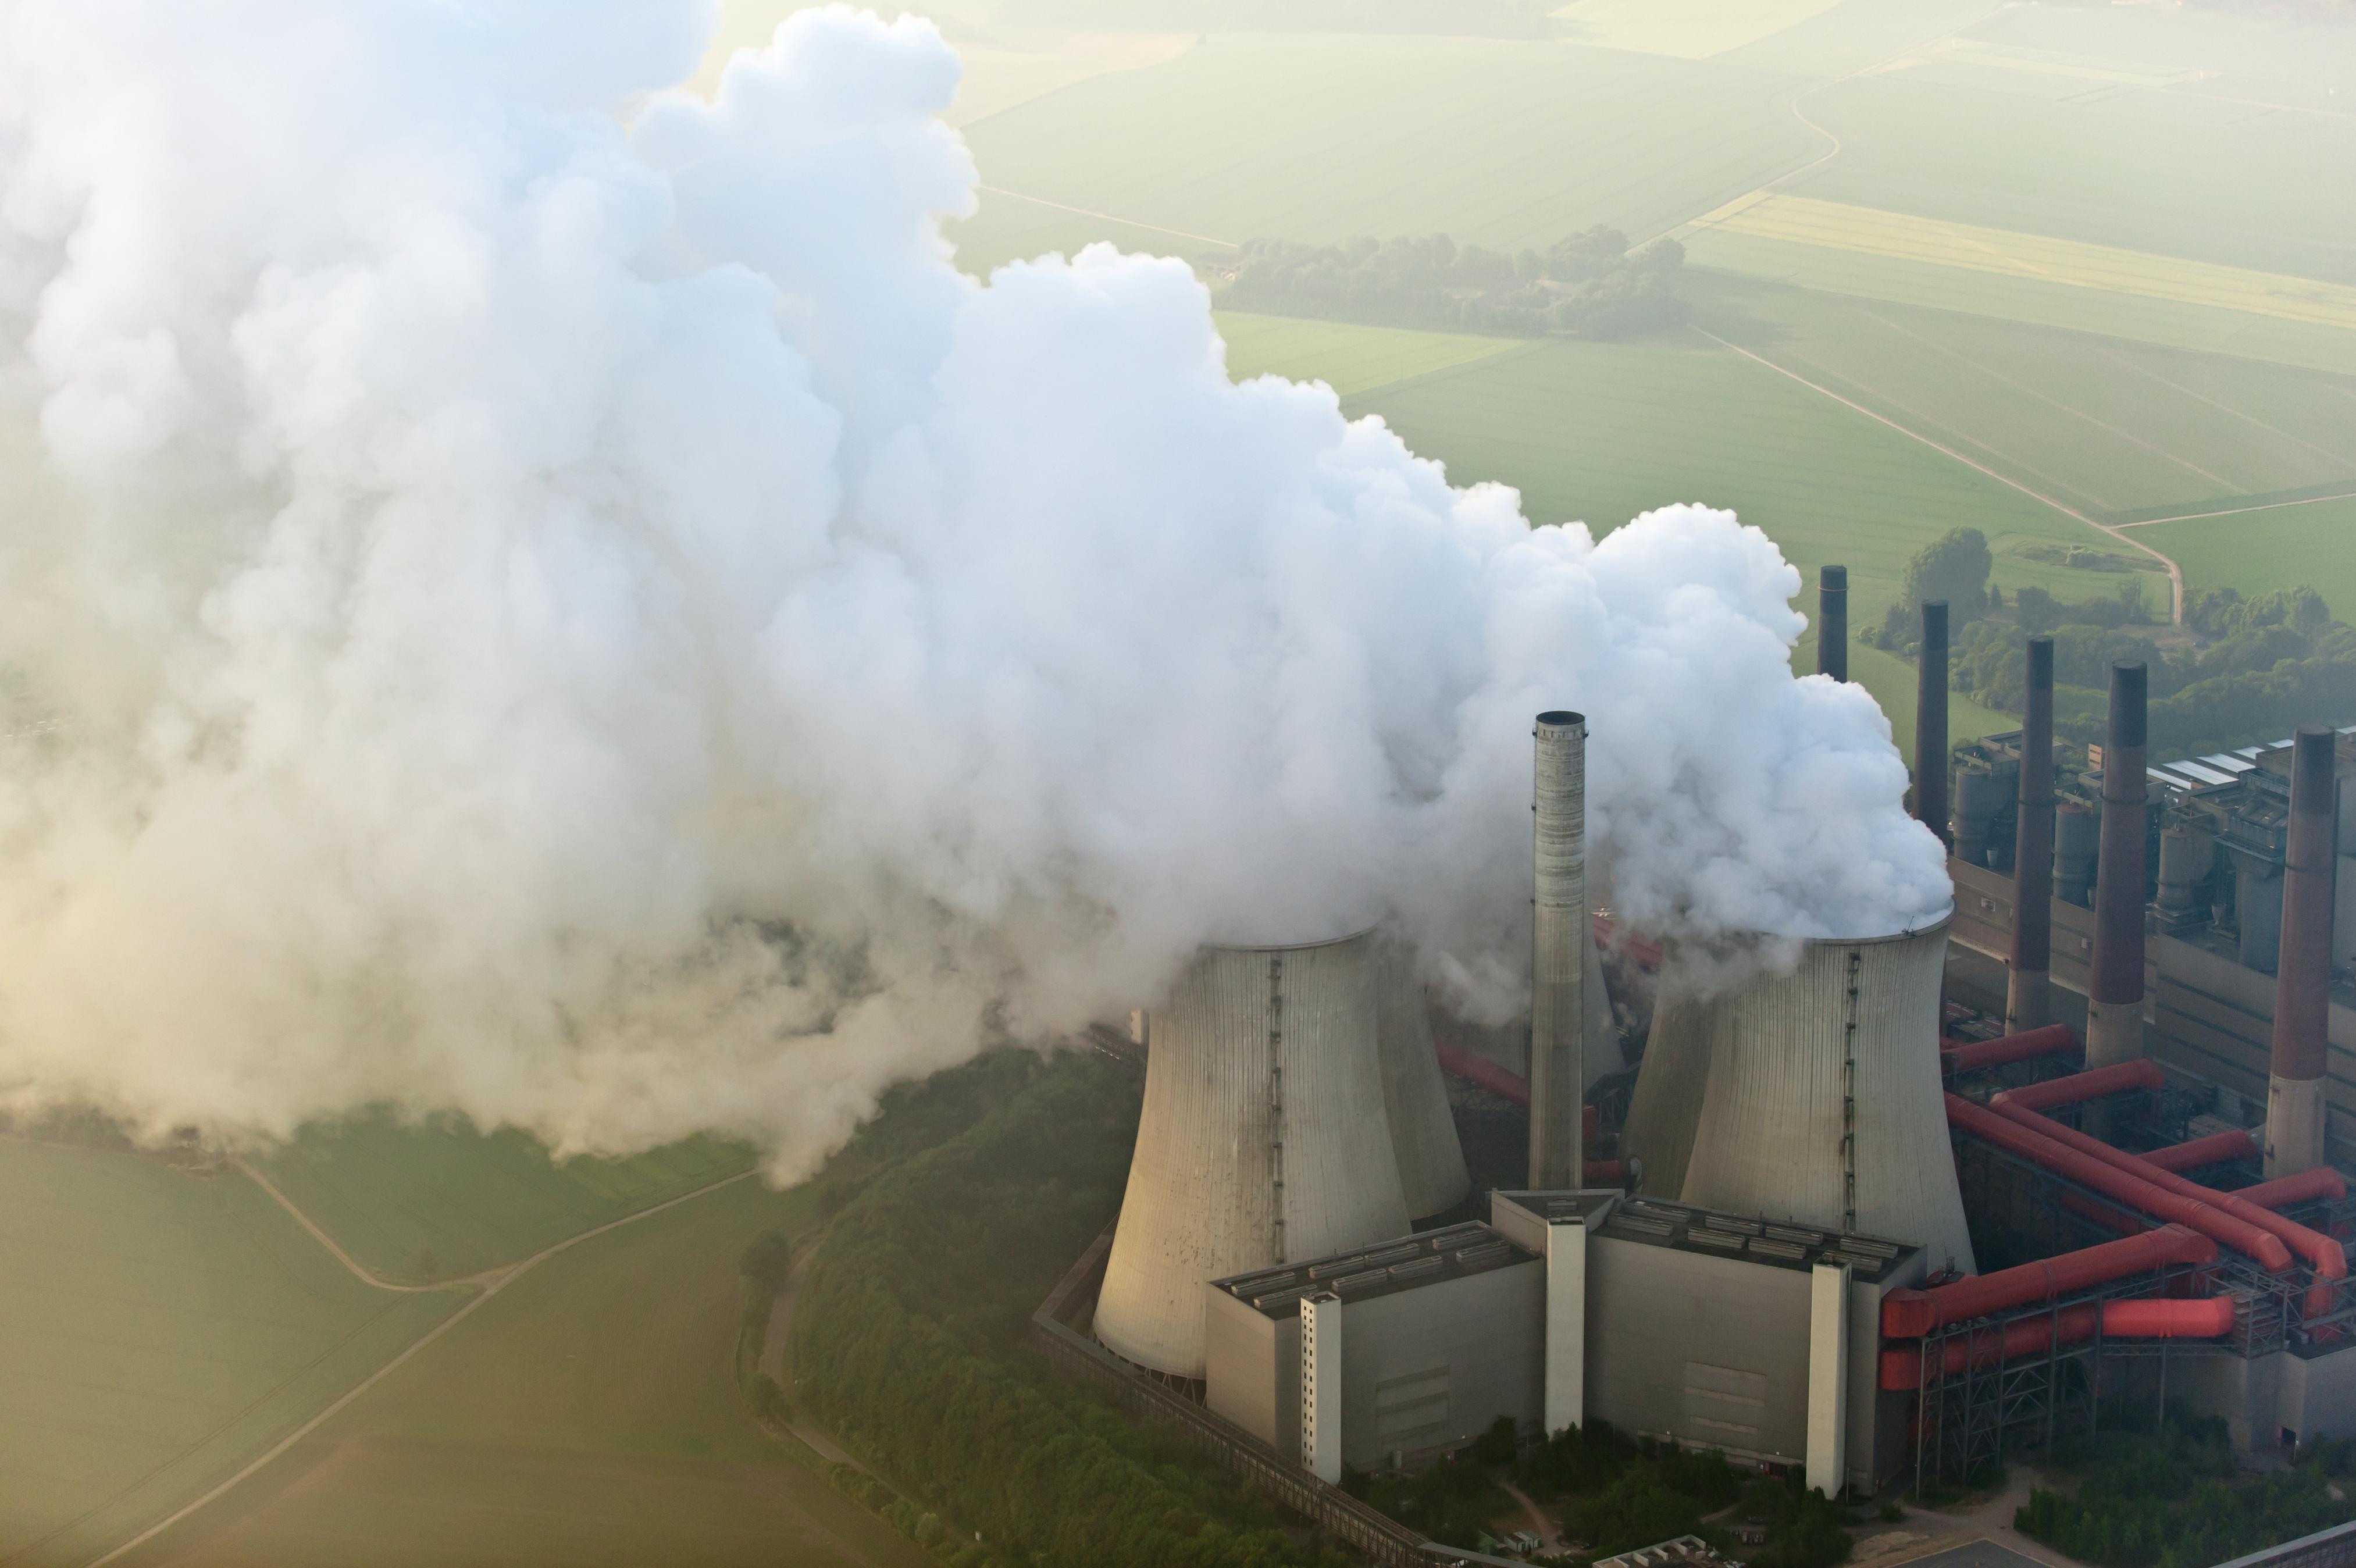 Aerial view of a coal power plant